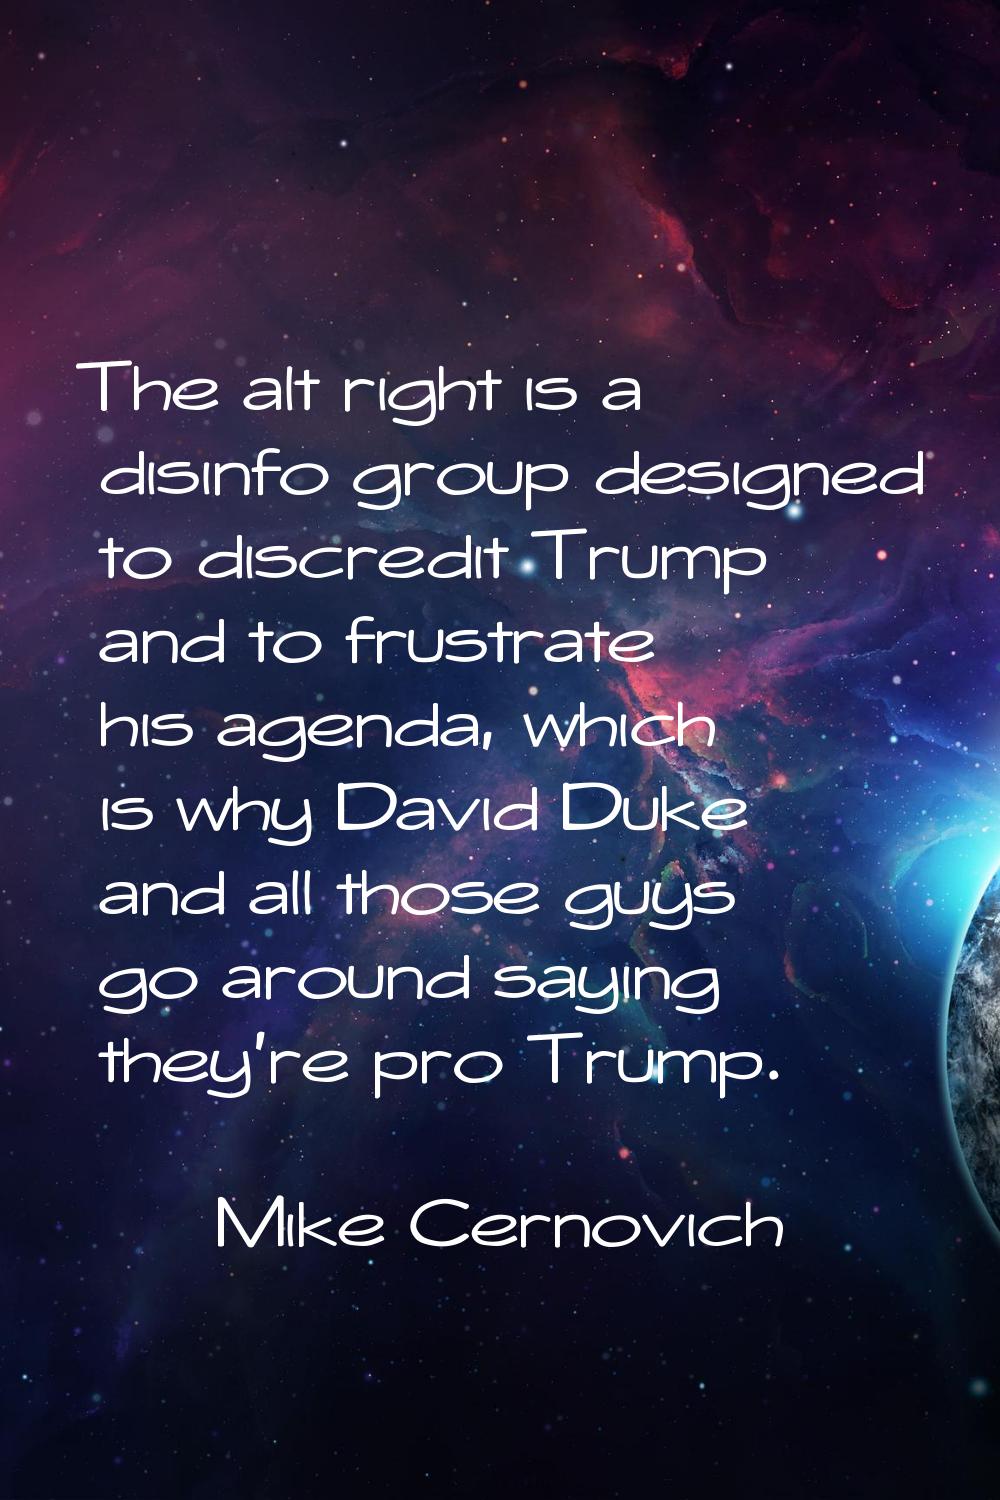 The alt right is a disinfo group designed to discredit Trump and to frustrate his agenda, which is 